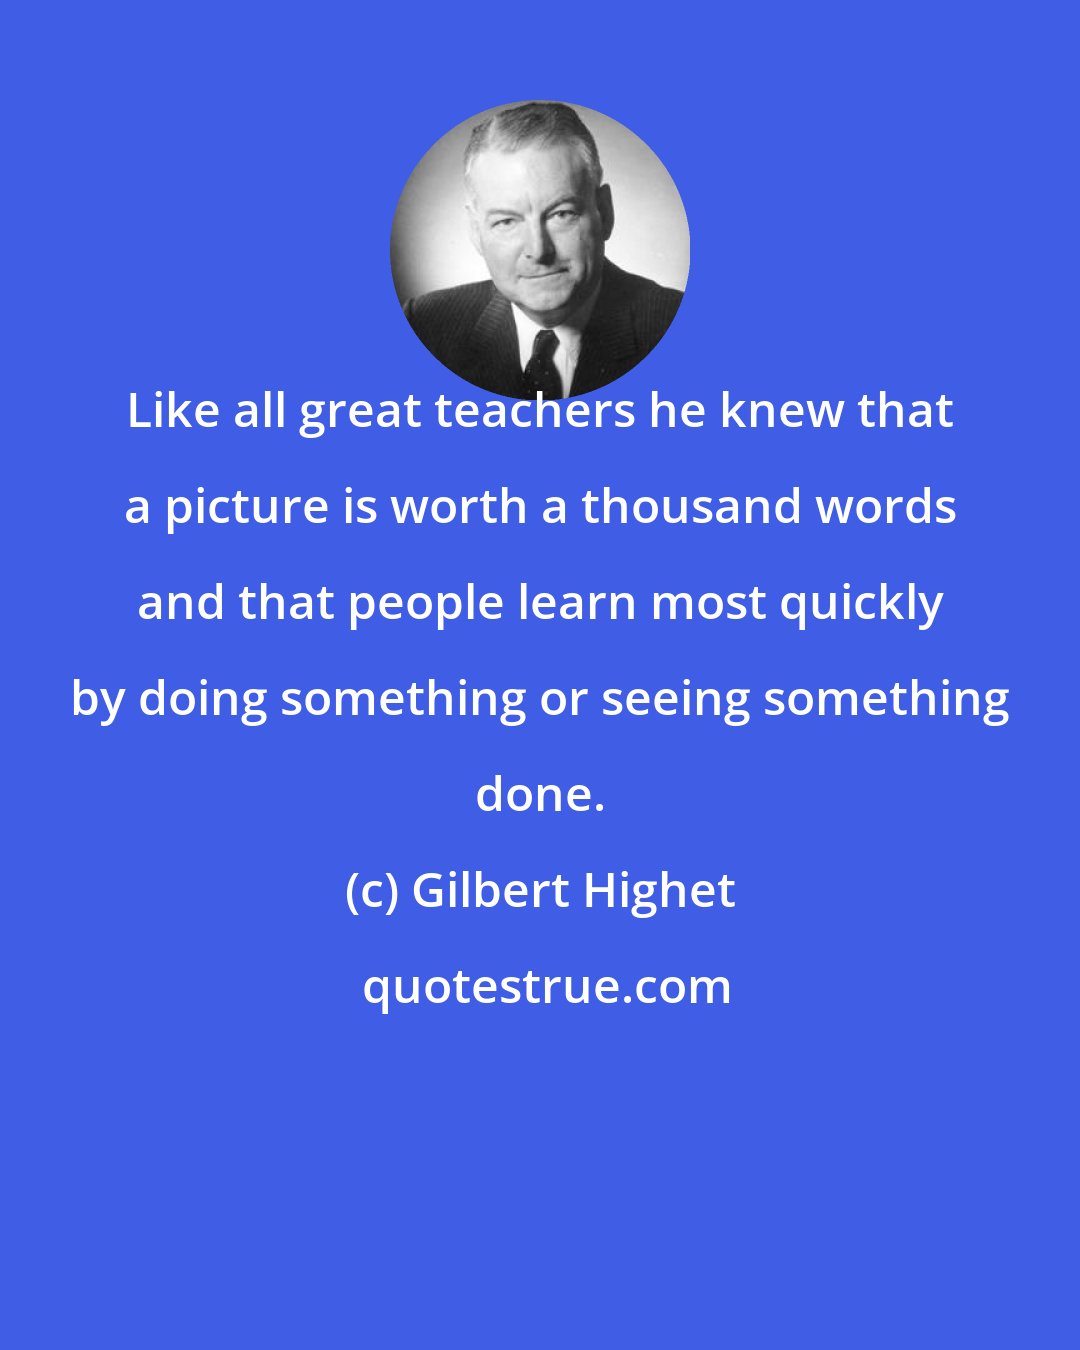 Gilbert Highet: Like all great teachers he knew that a picture is worth a thousand words and that people learn most quickly by doing something or seeing something done.